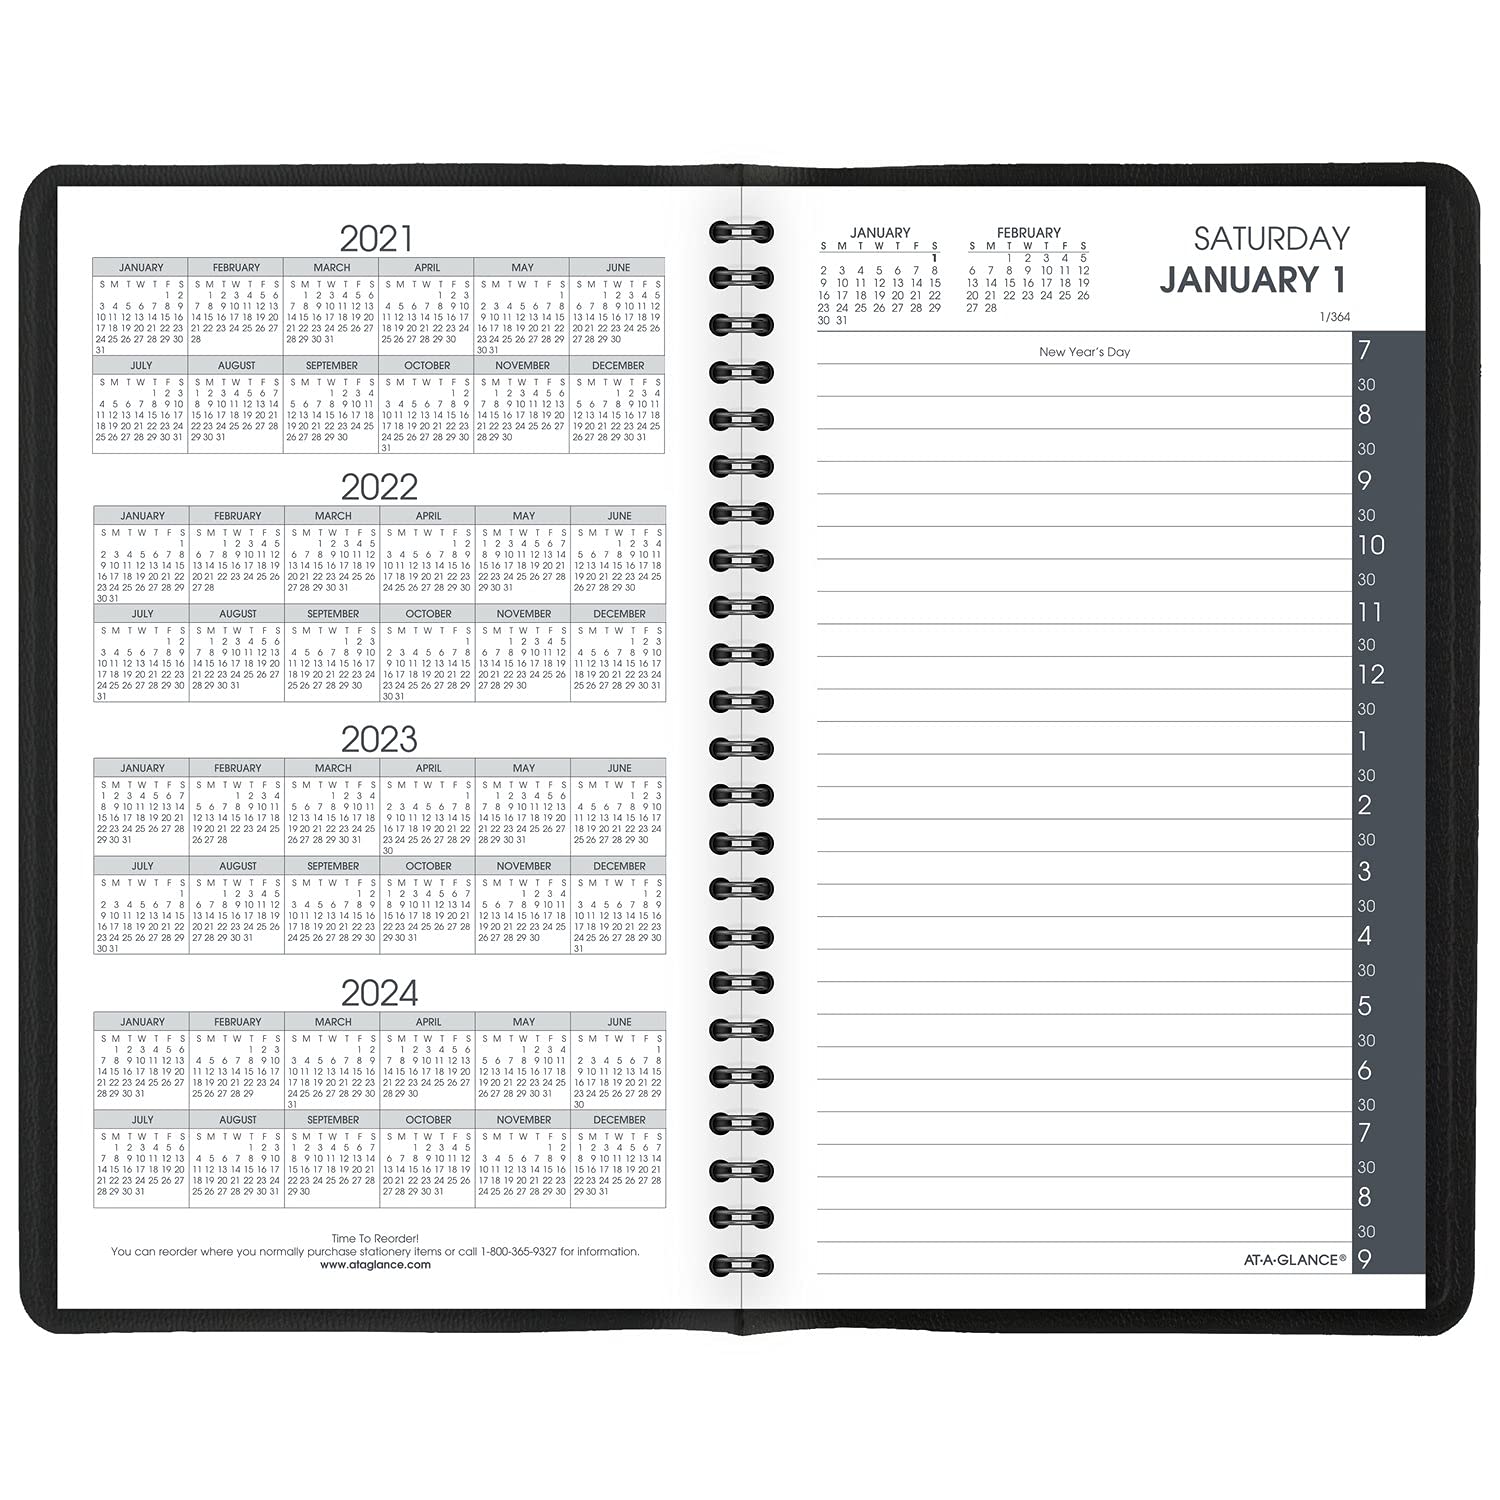 AT-A-GLANCE 2022 Daily Appointment Book & Planner by AT-A-GLANCE, 5" x 8", Small, Black (7020705)